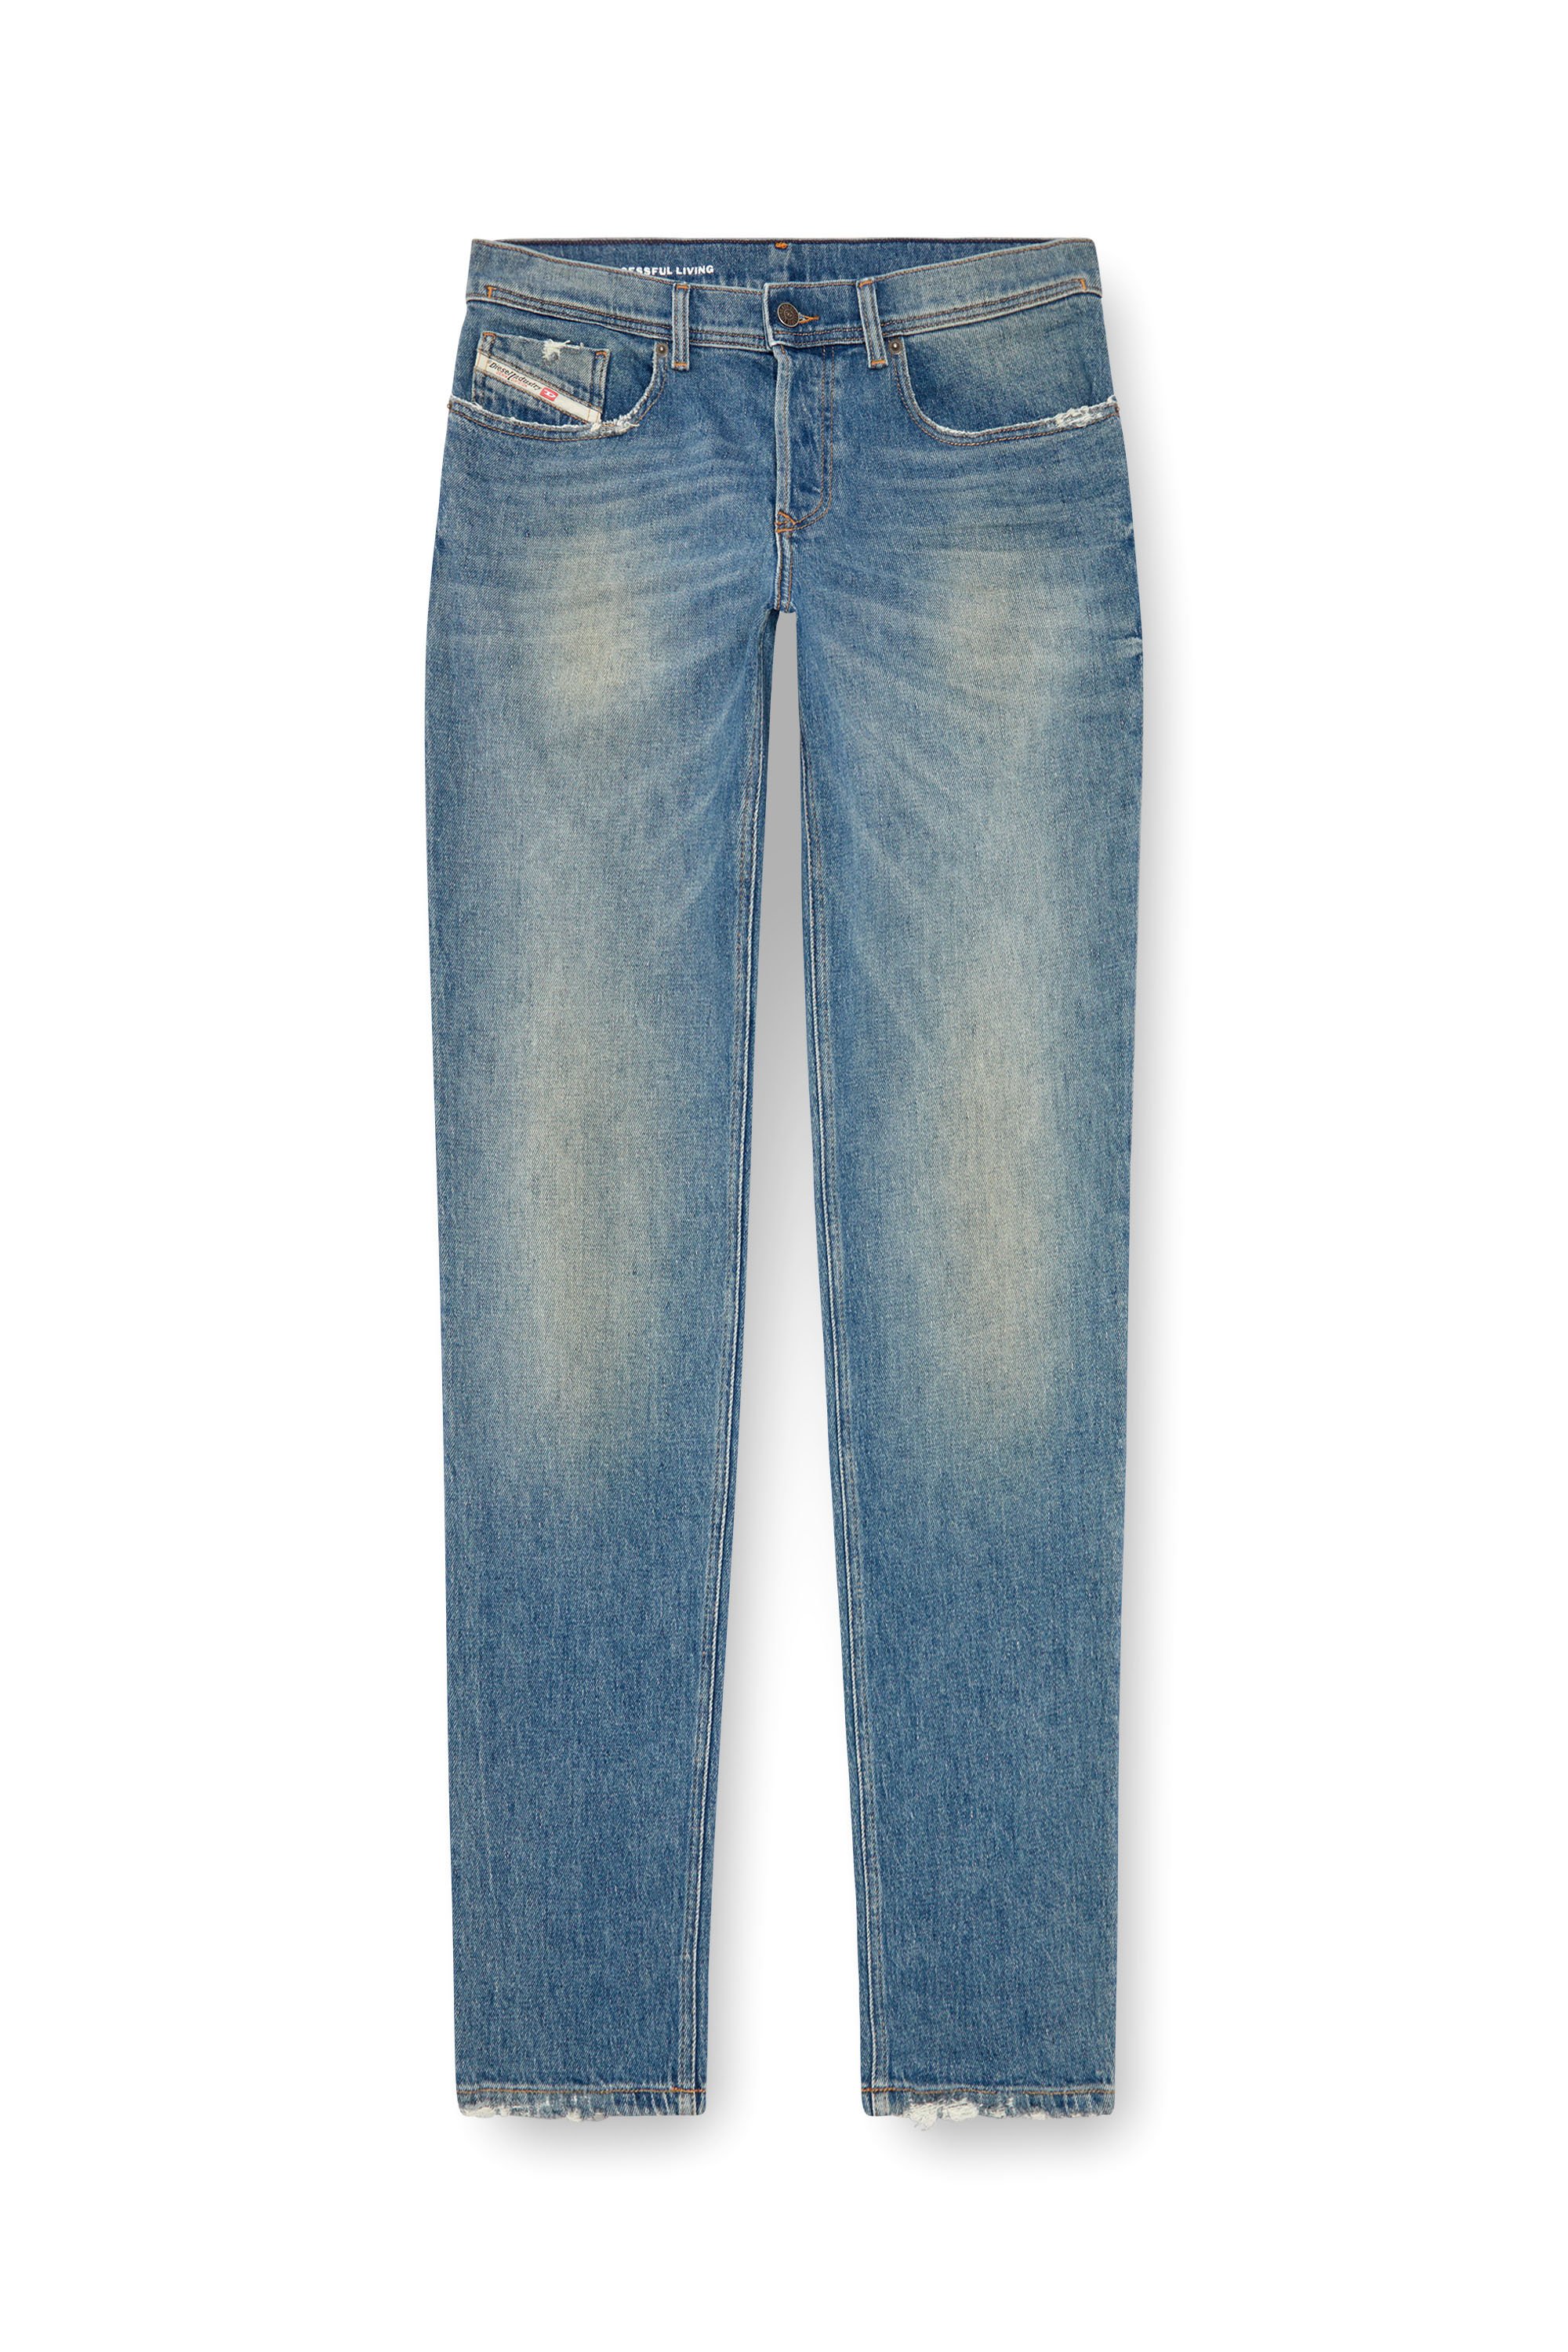 Diesel - Tapered Jeans 2023 D-Finitive 0GRDB, Hombre Tapered Jeans - 2023 D-Finitive in Azul marino - Image 3